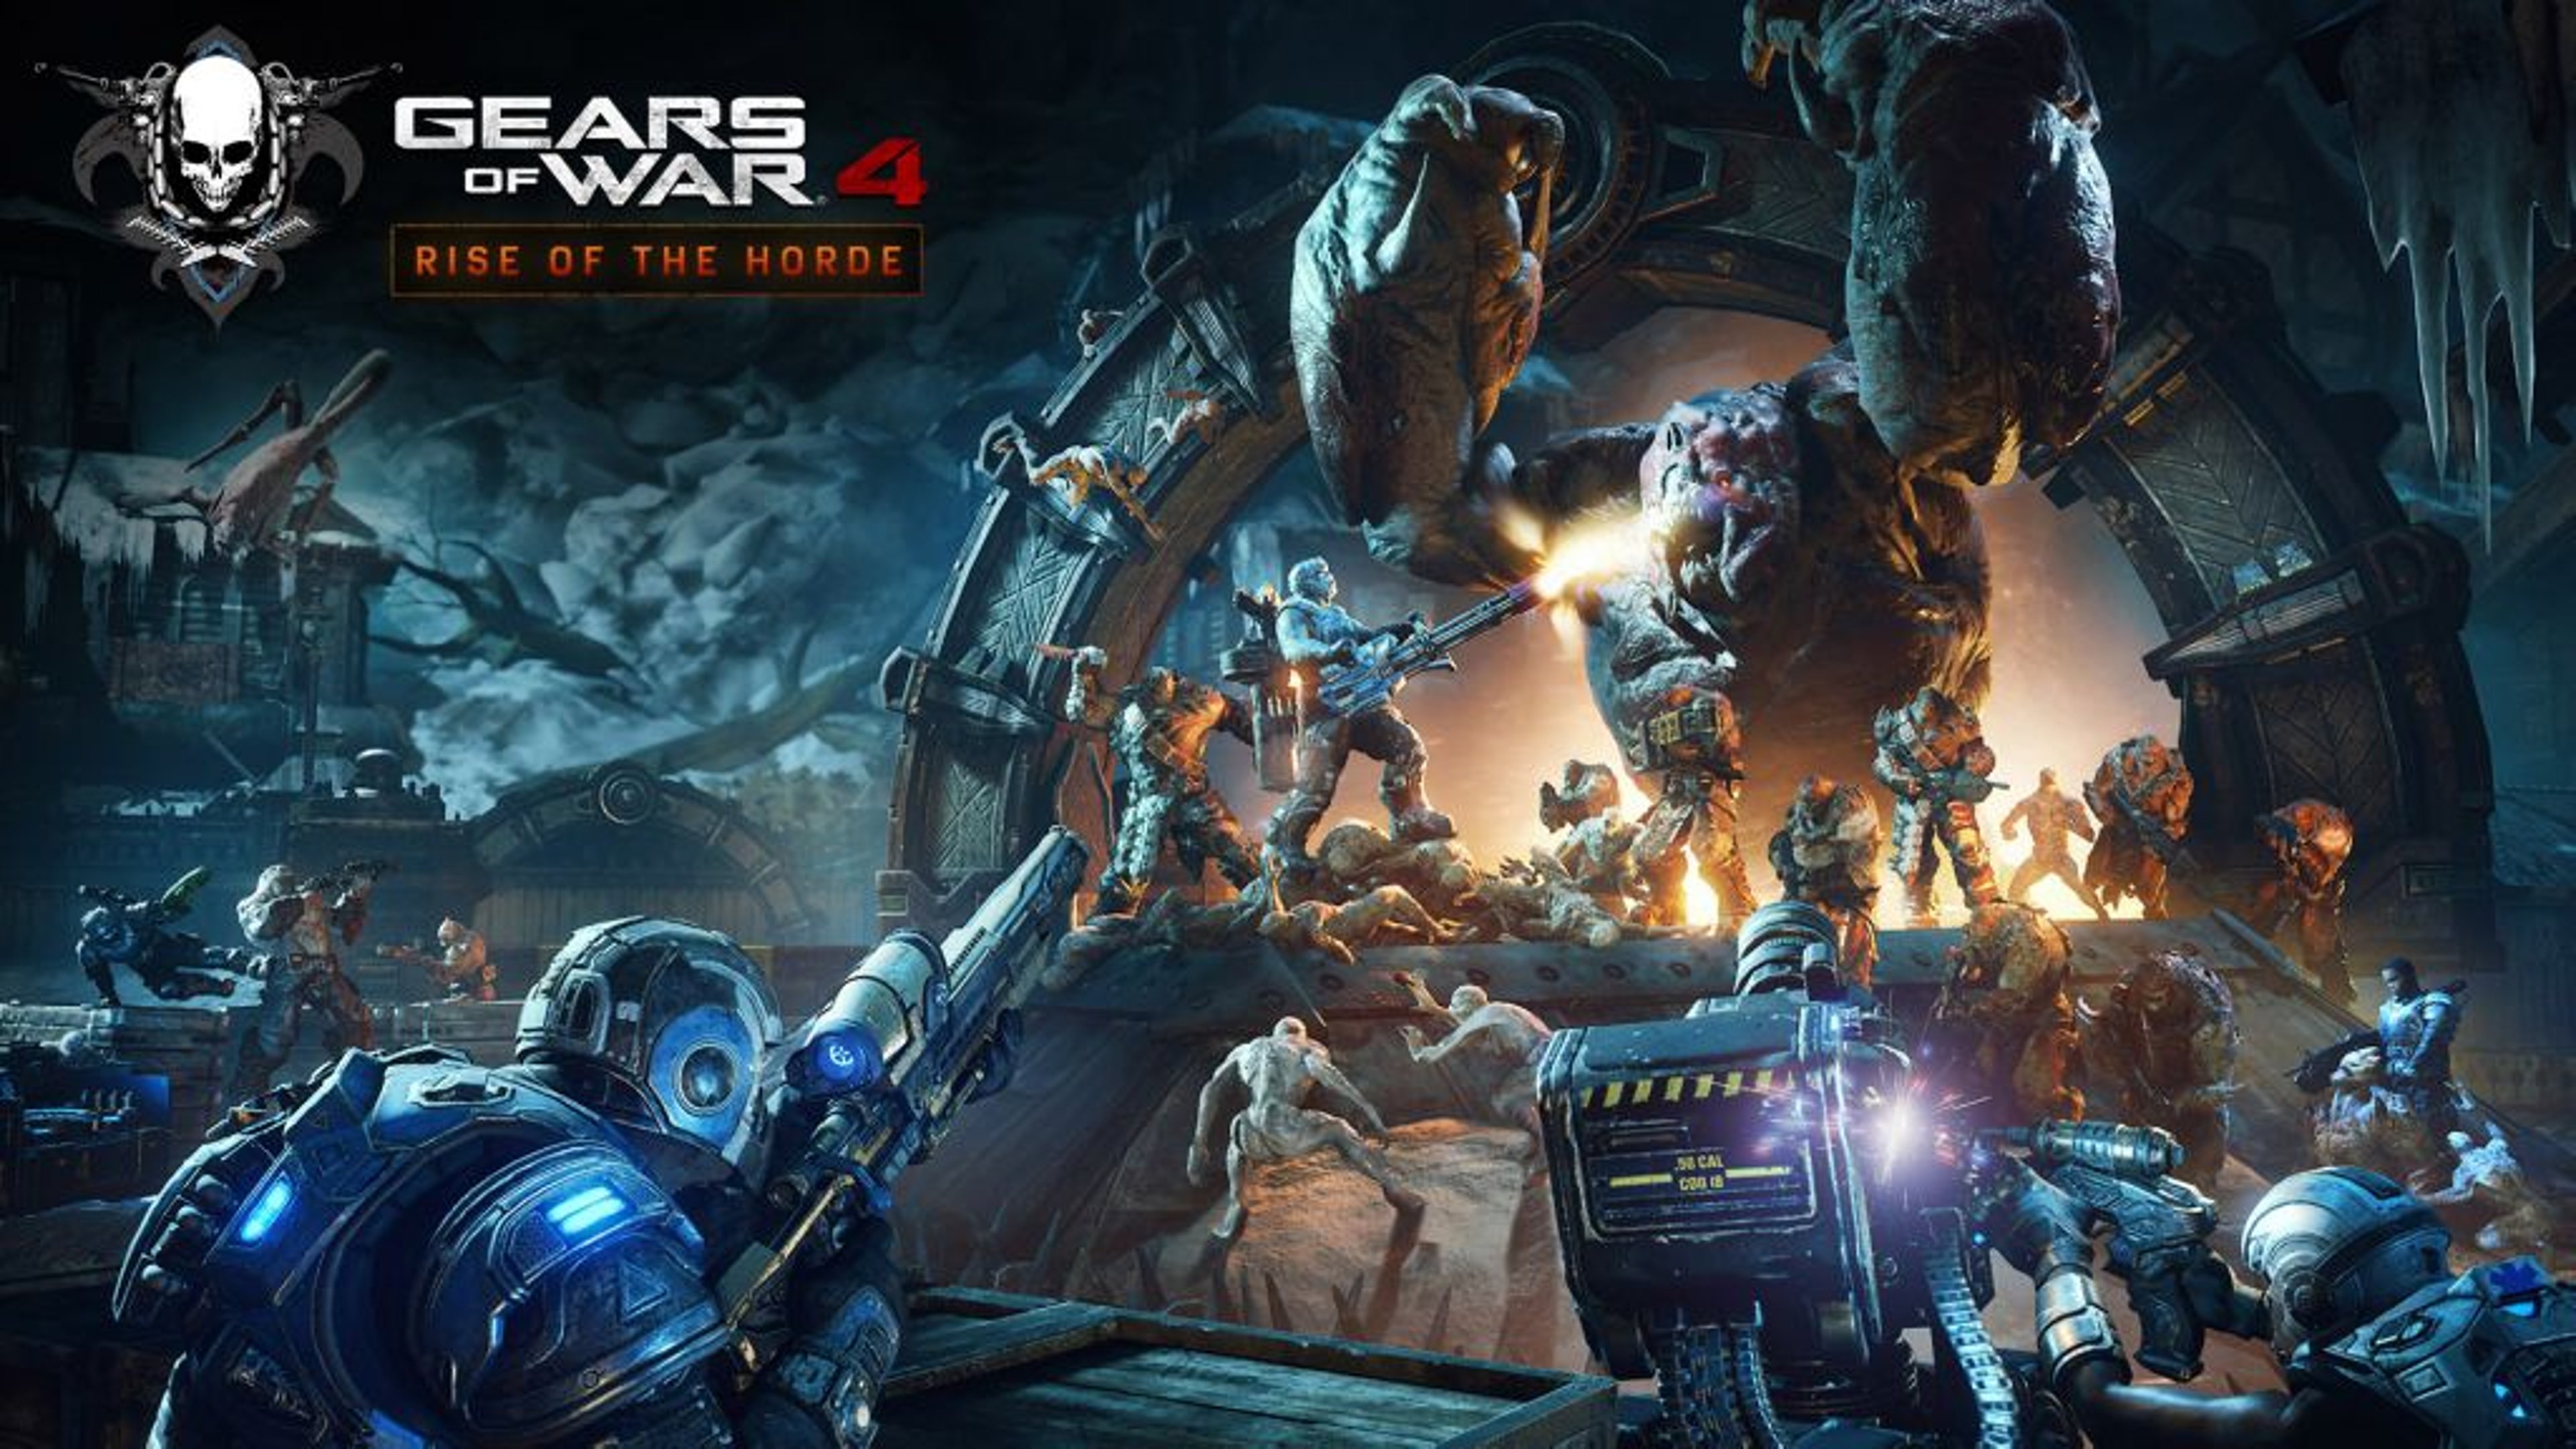 Gears Of War 4: Rise of the Horde